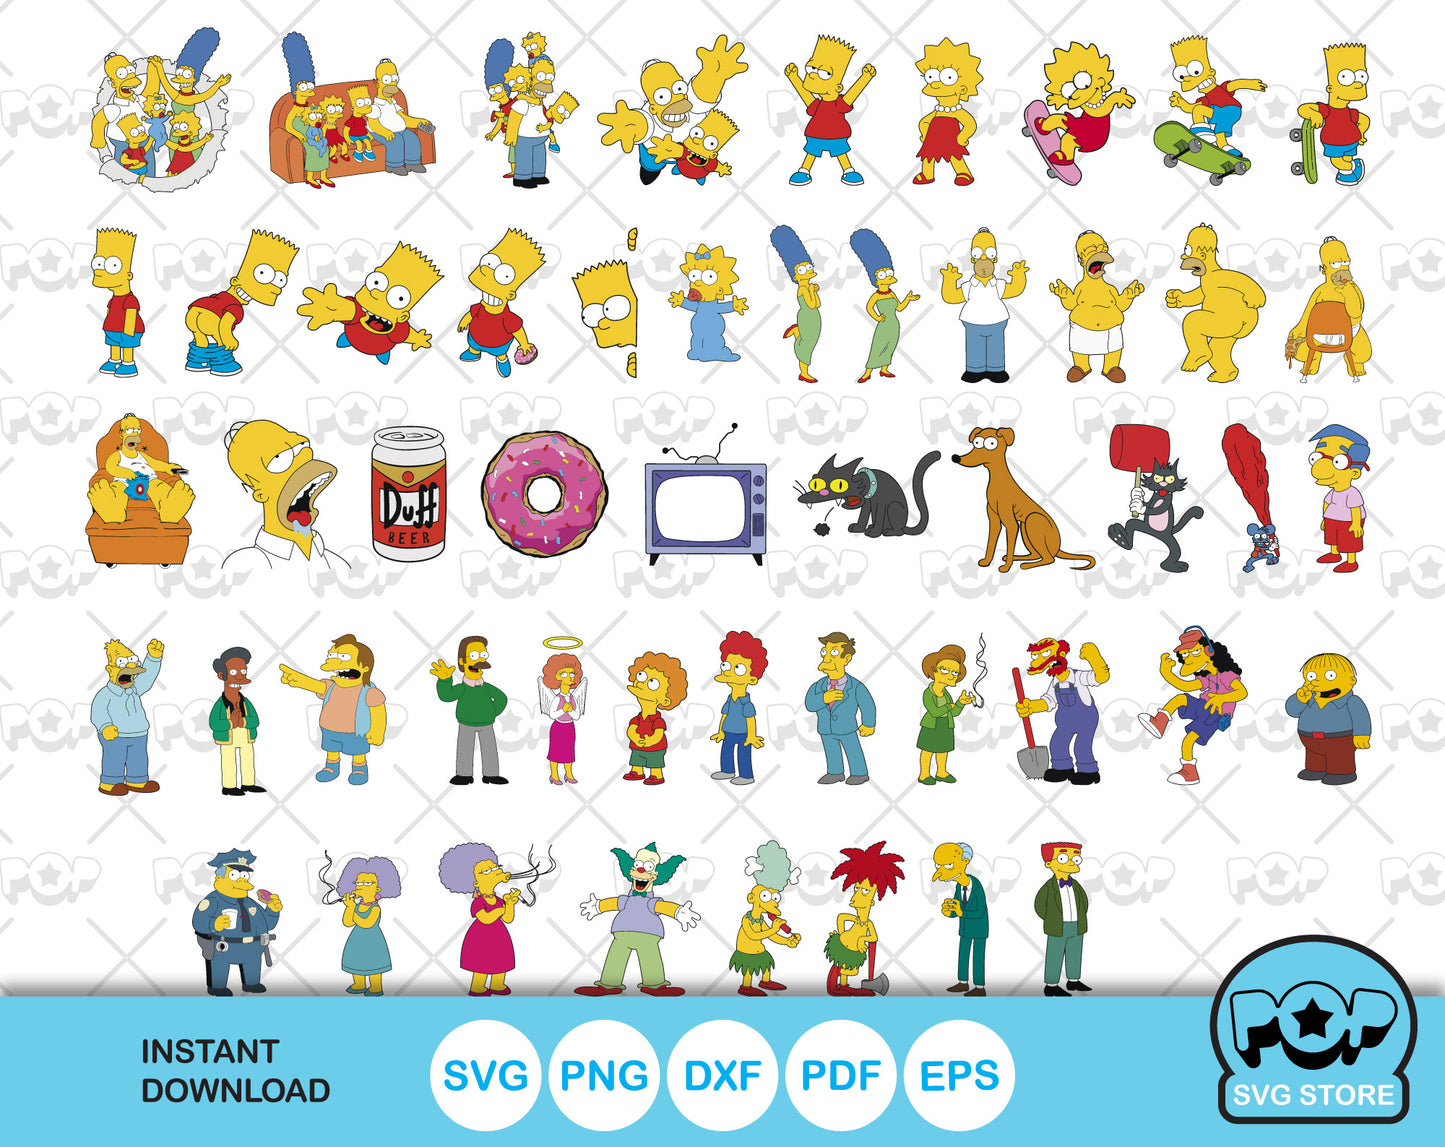 The Simpsons clipart bundle, The Simpsons SVG cutting files for Cricut / Silhouette, instant download